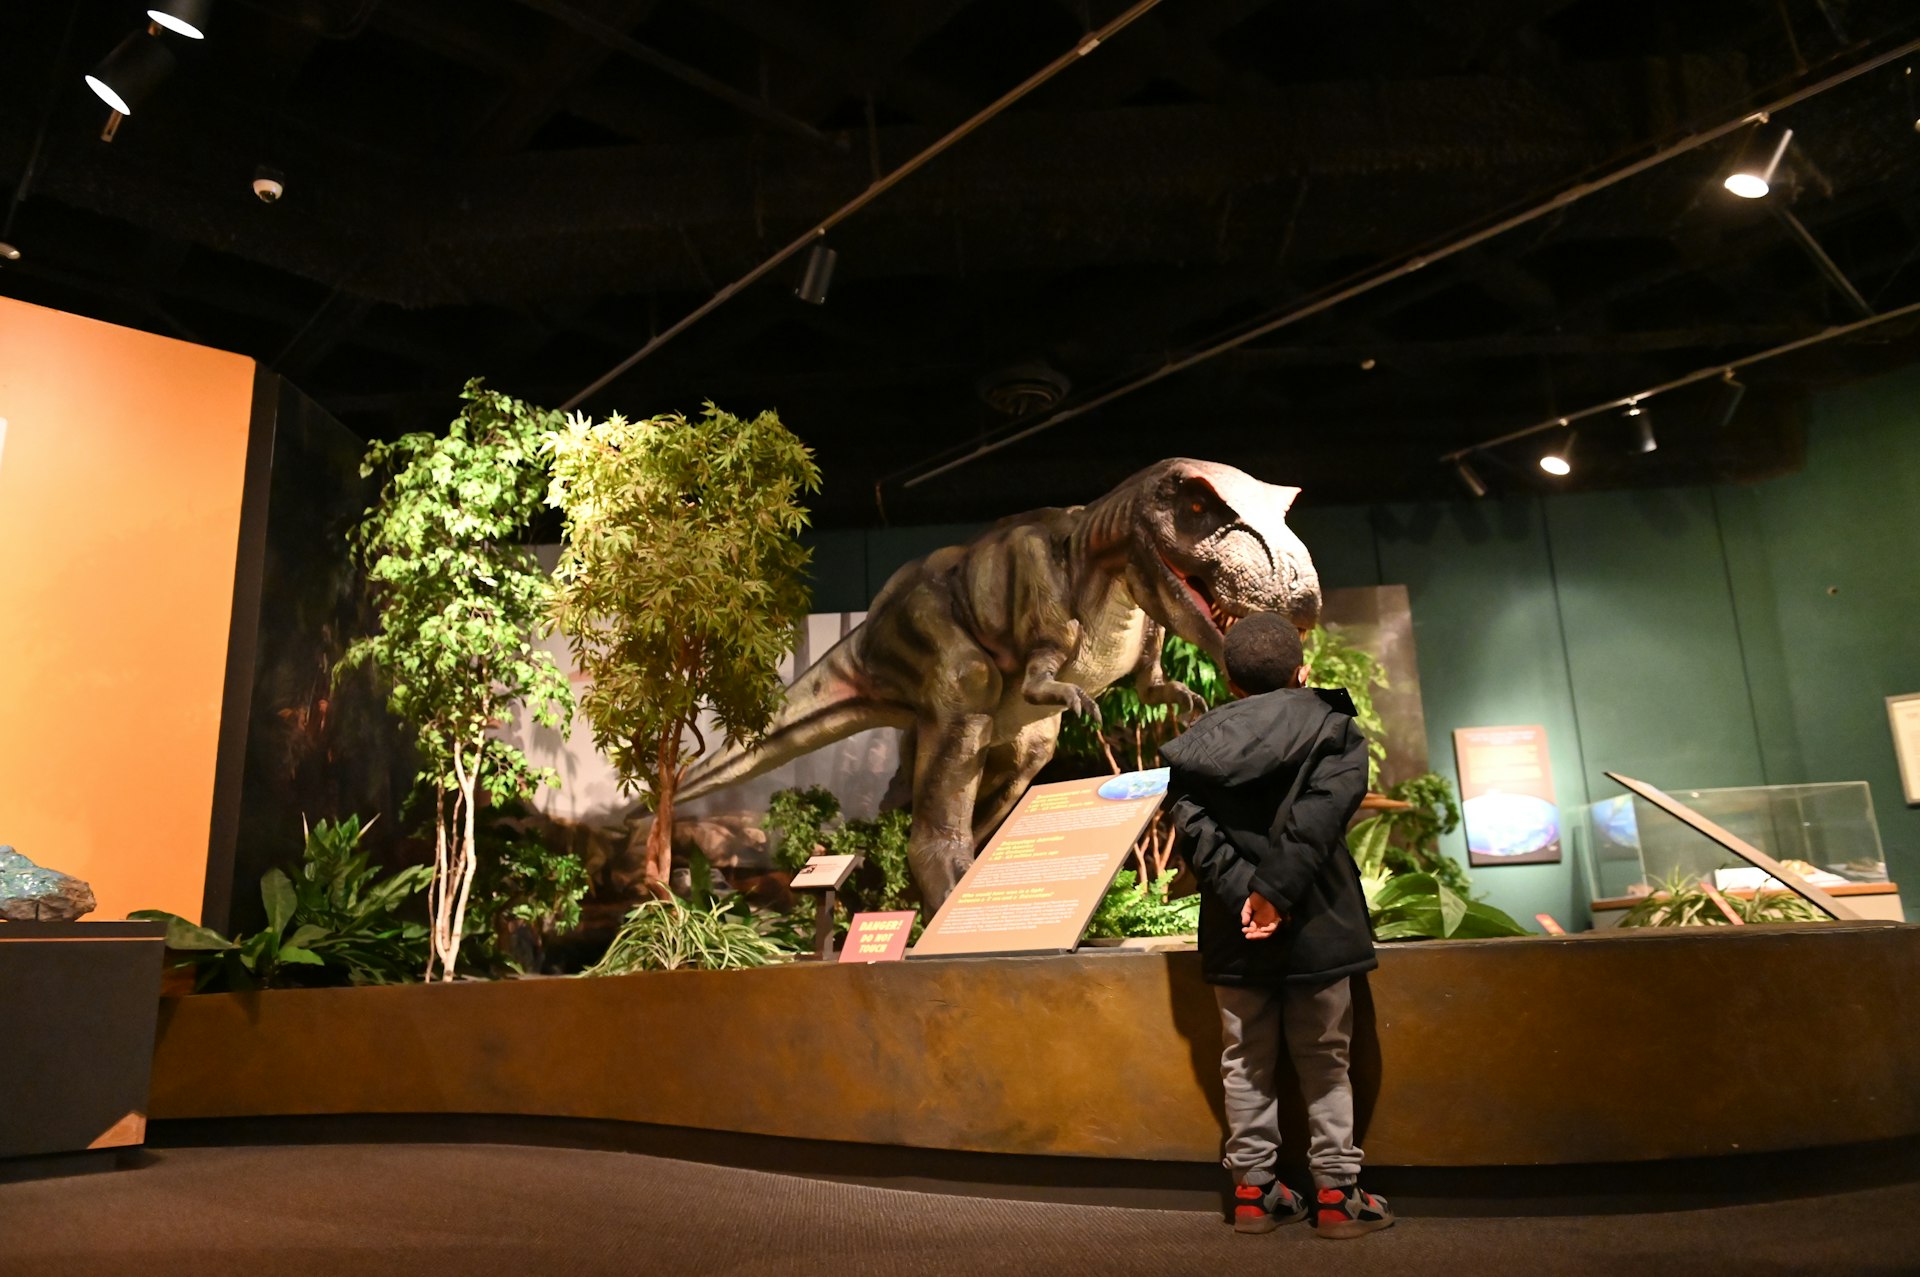 A young boy stands in front of a replica of a large dinosaur at an exhibit at the Memphis Museum of Science & History